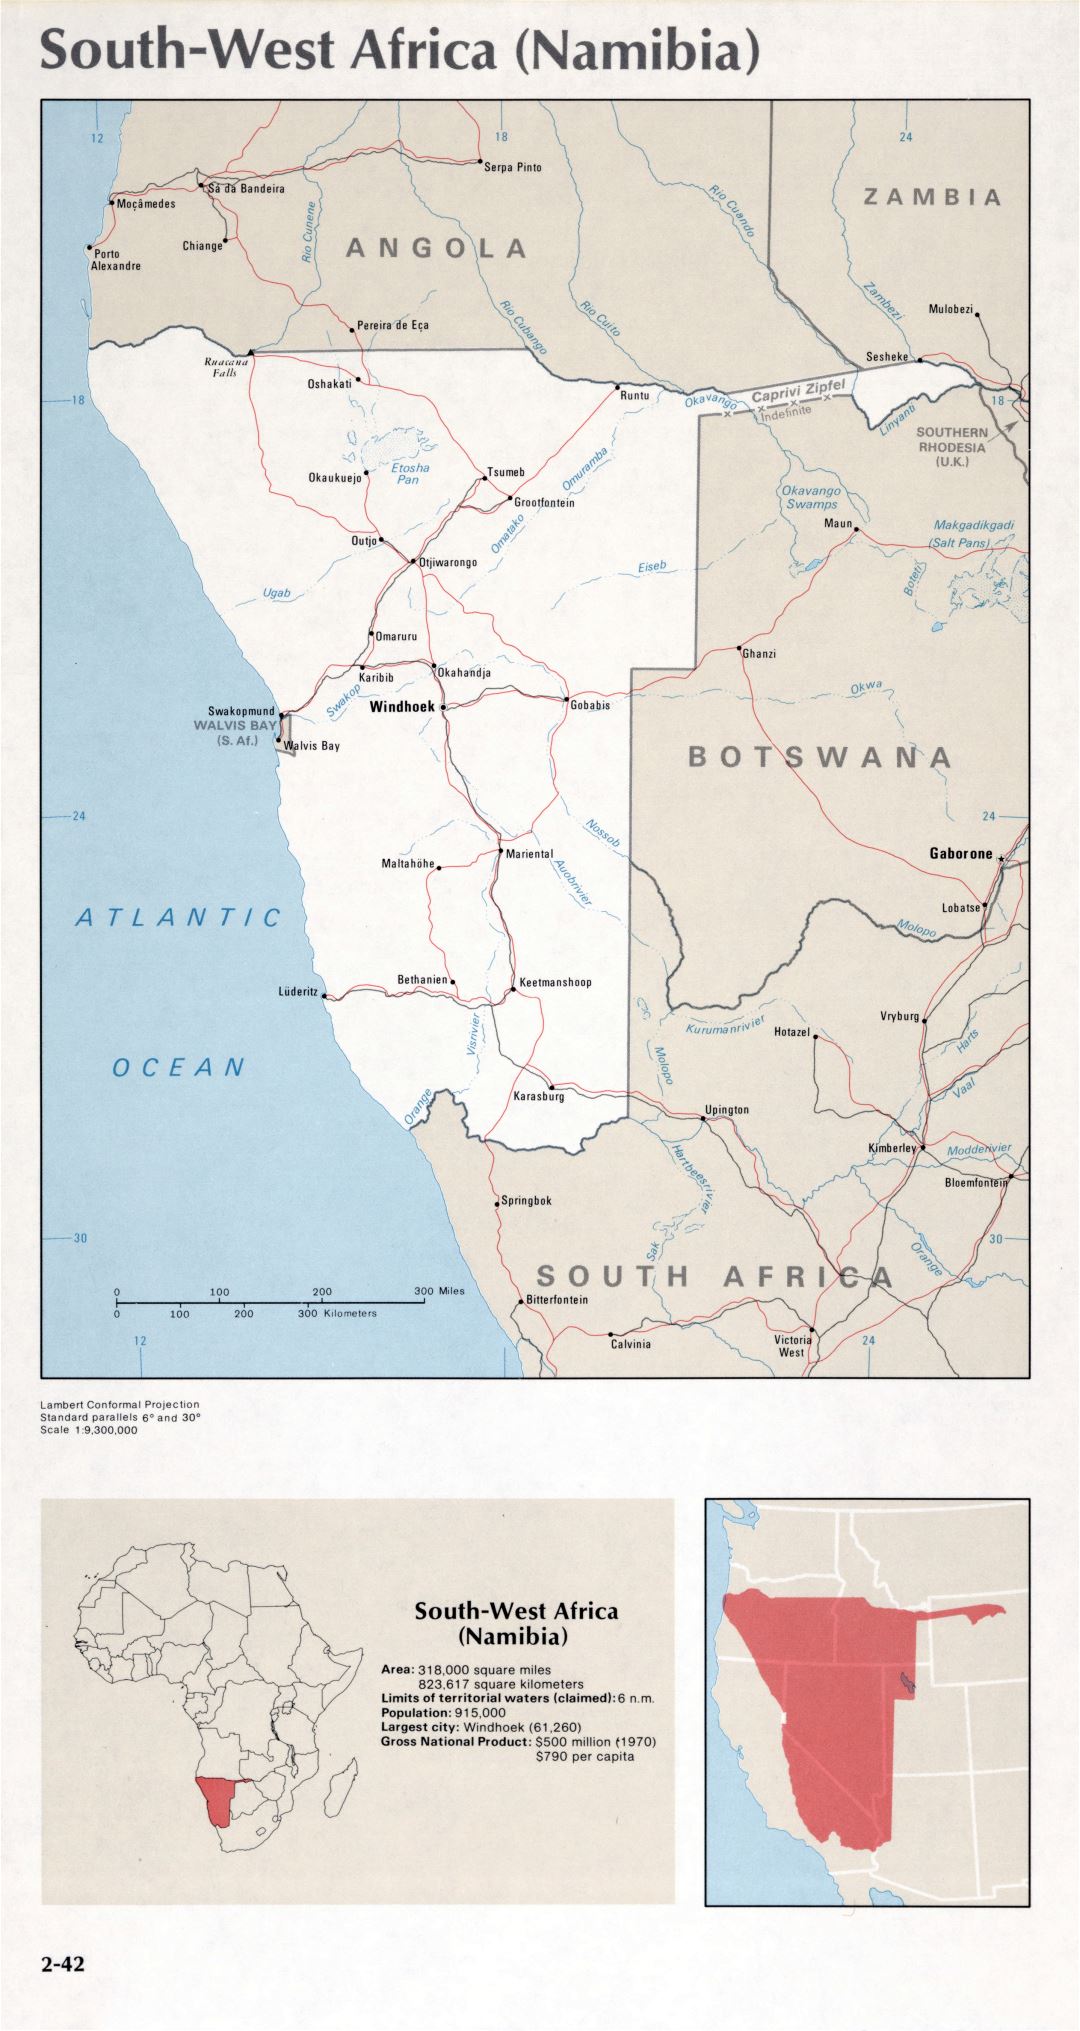 Map of South-West Africa (Namibia) (2-42)